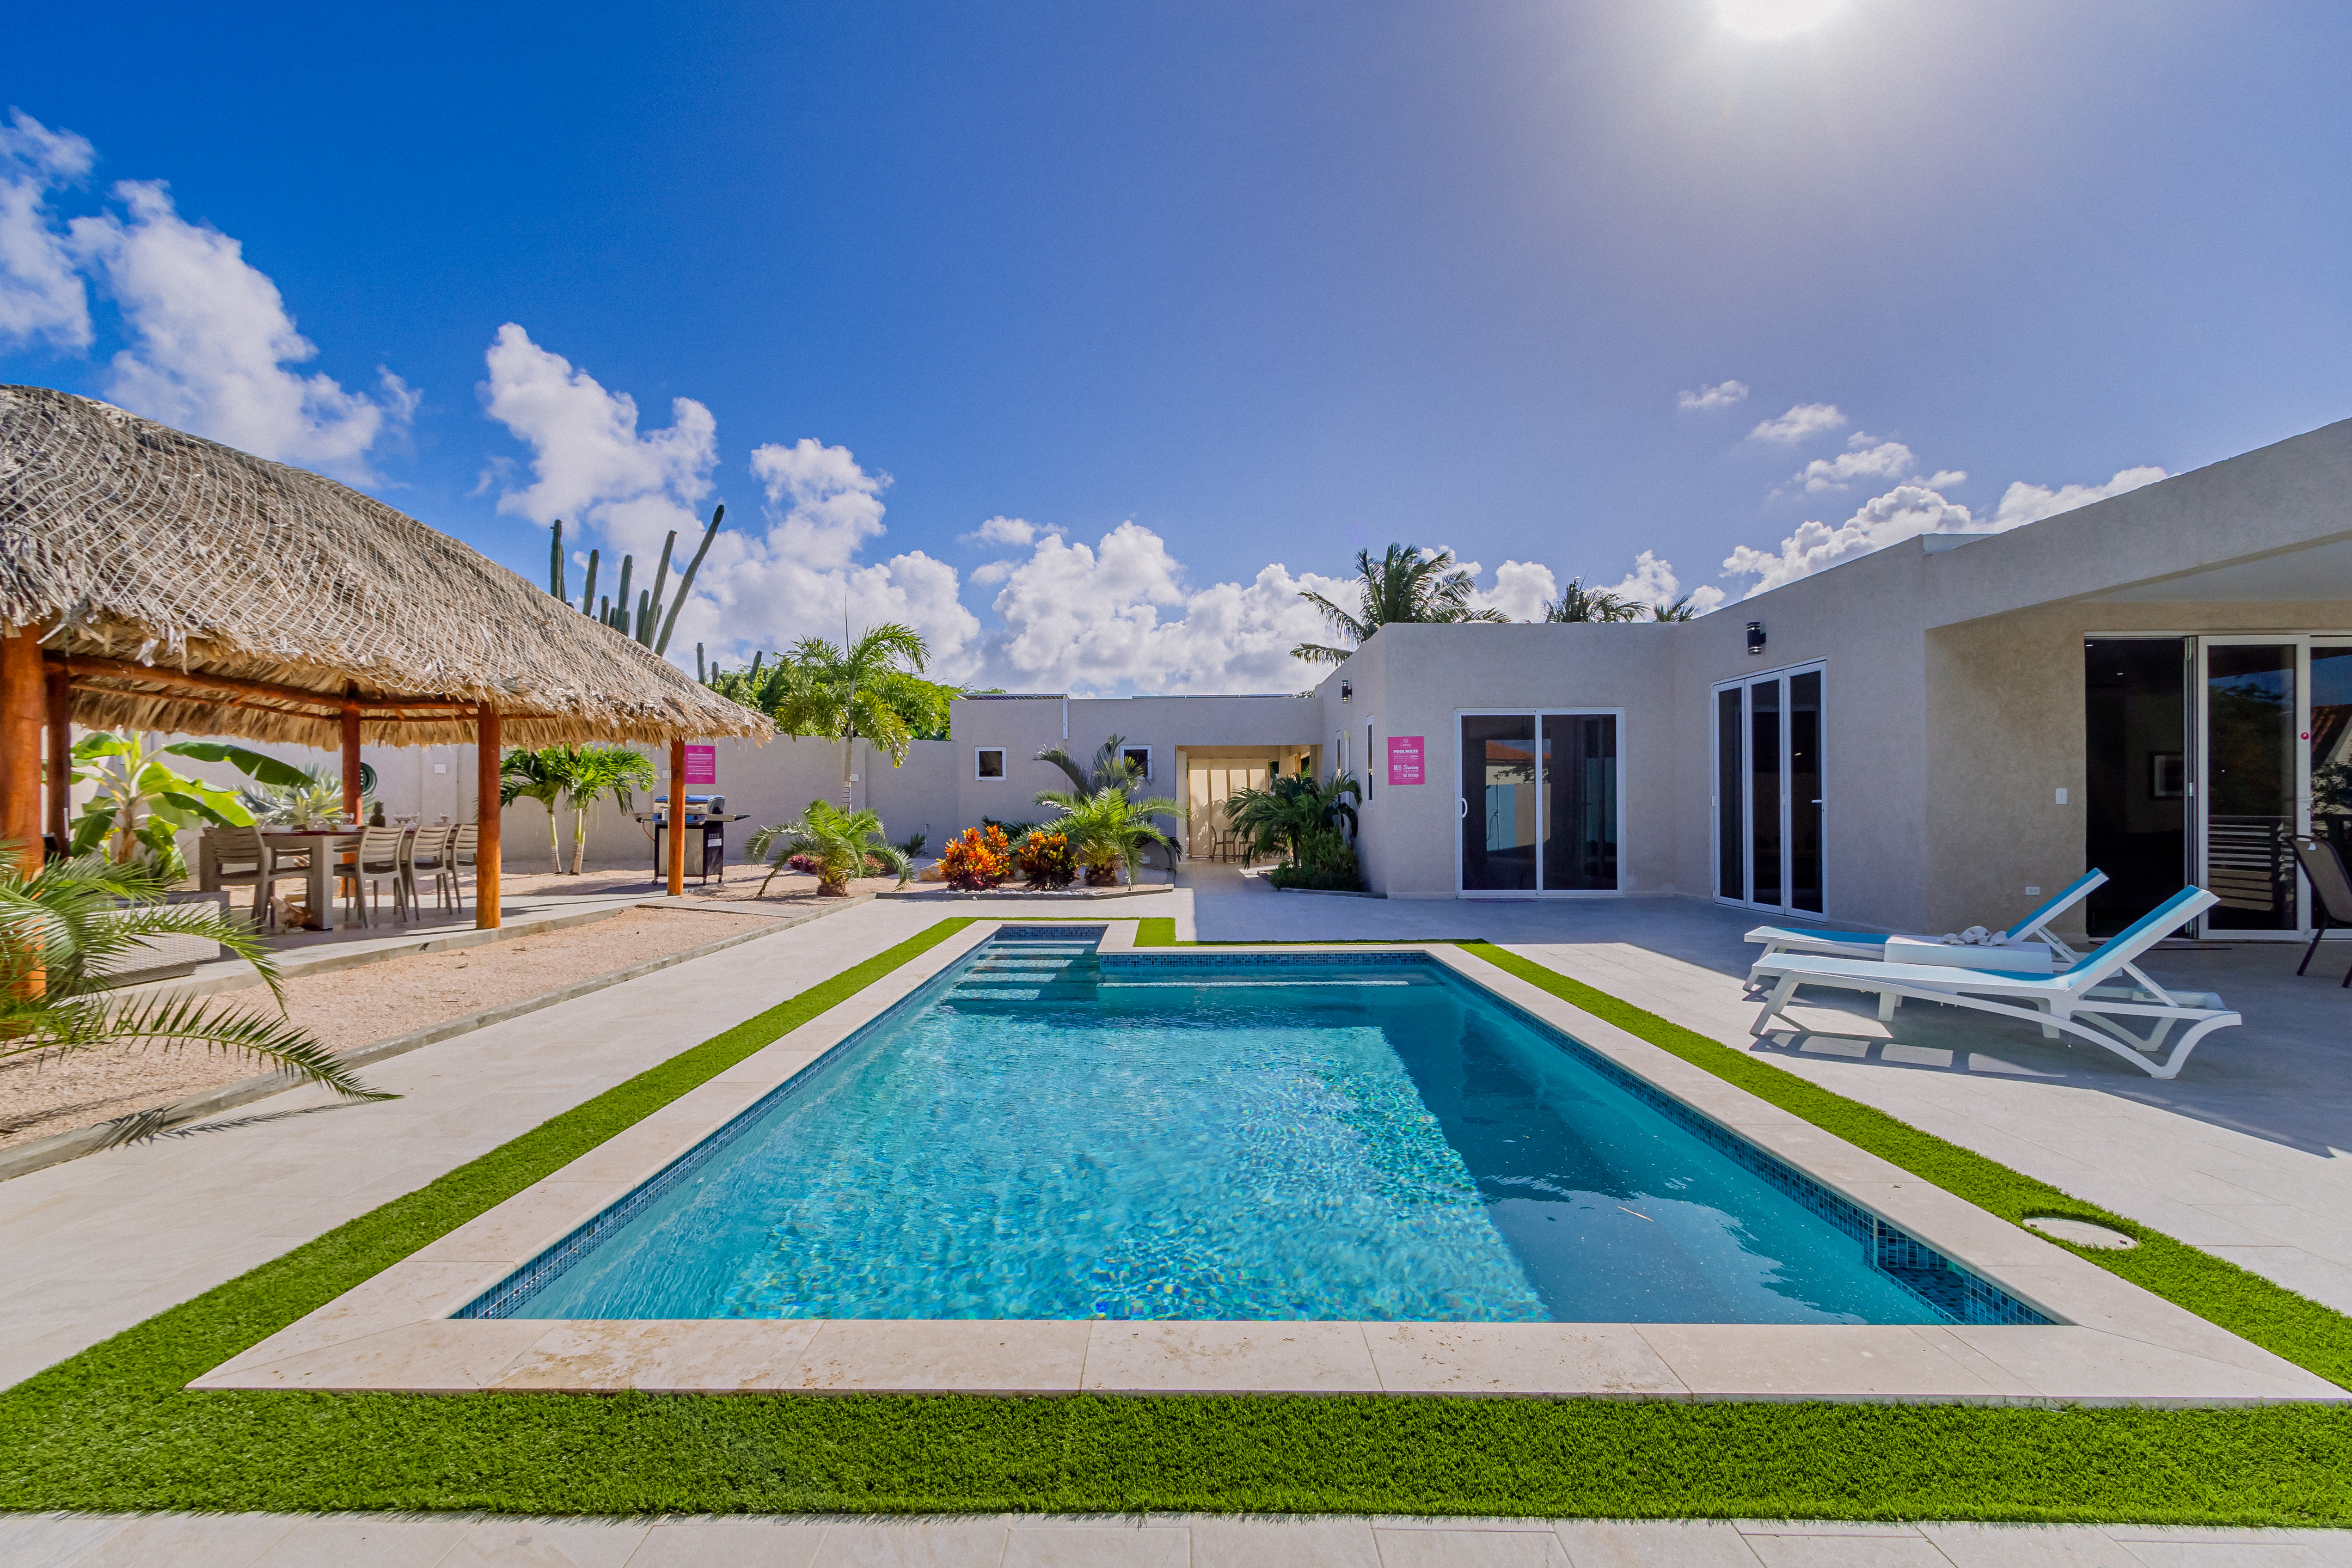 Luxury pool area of the 4BR Home in Noord, Aruba - Lush and refreshing environment - Cozy beach chairs available - Beautifully sunbathed space makes the soul peaceful  - Experience the comfort at the best